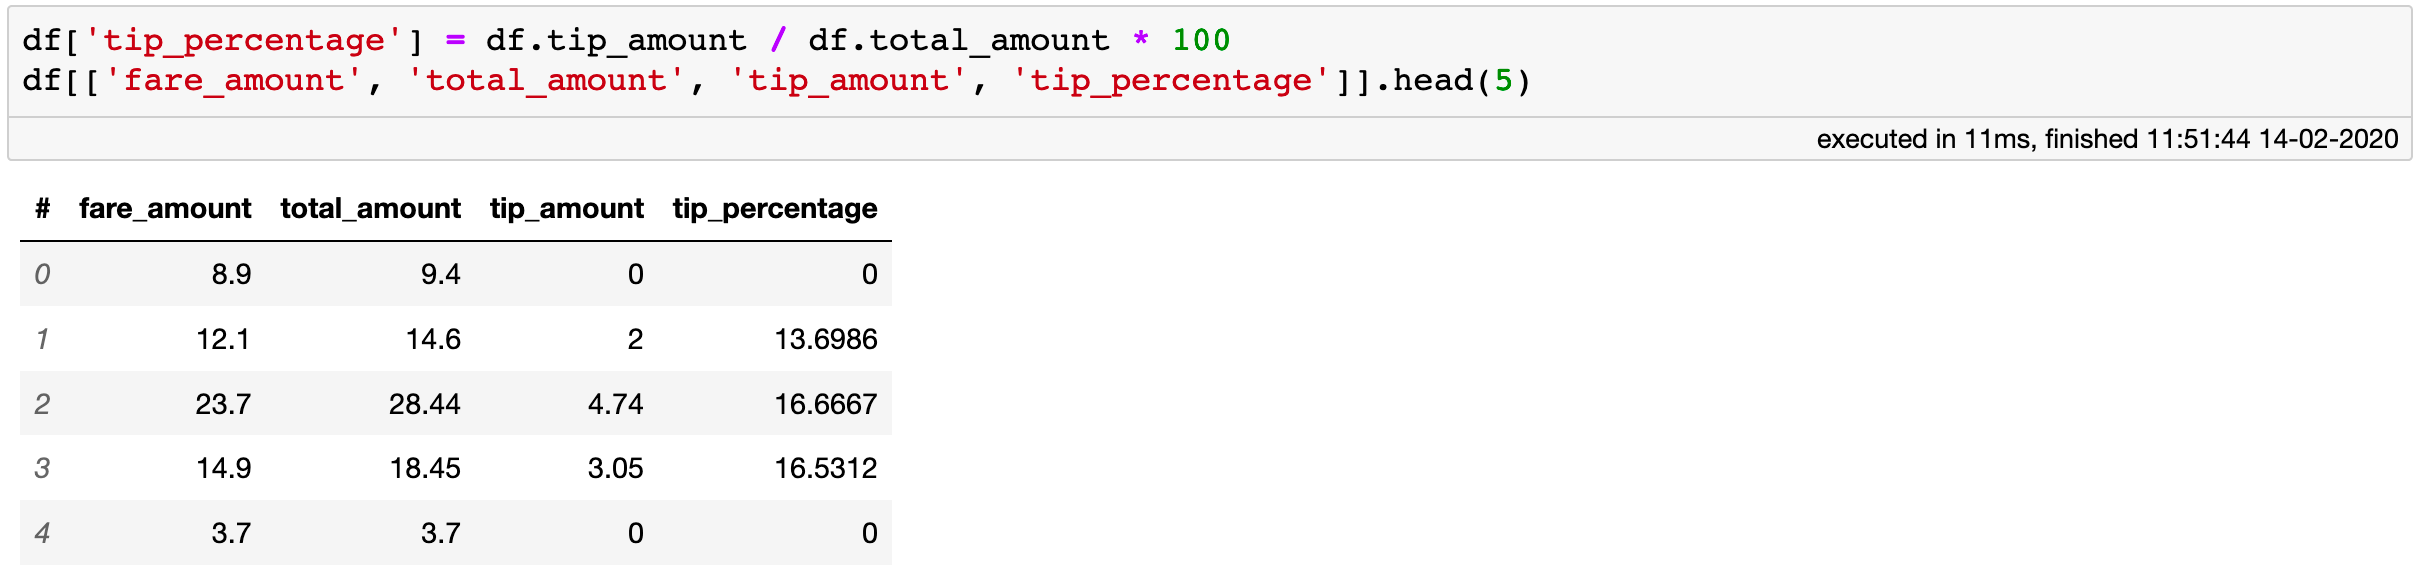 The “tip_percentage” column is a virtual column: it take no extra memory and is lazily evaluated on the fly when needed.